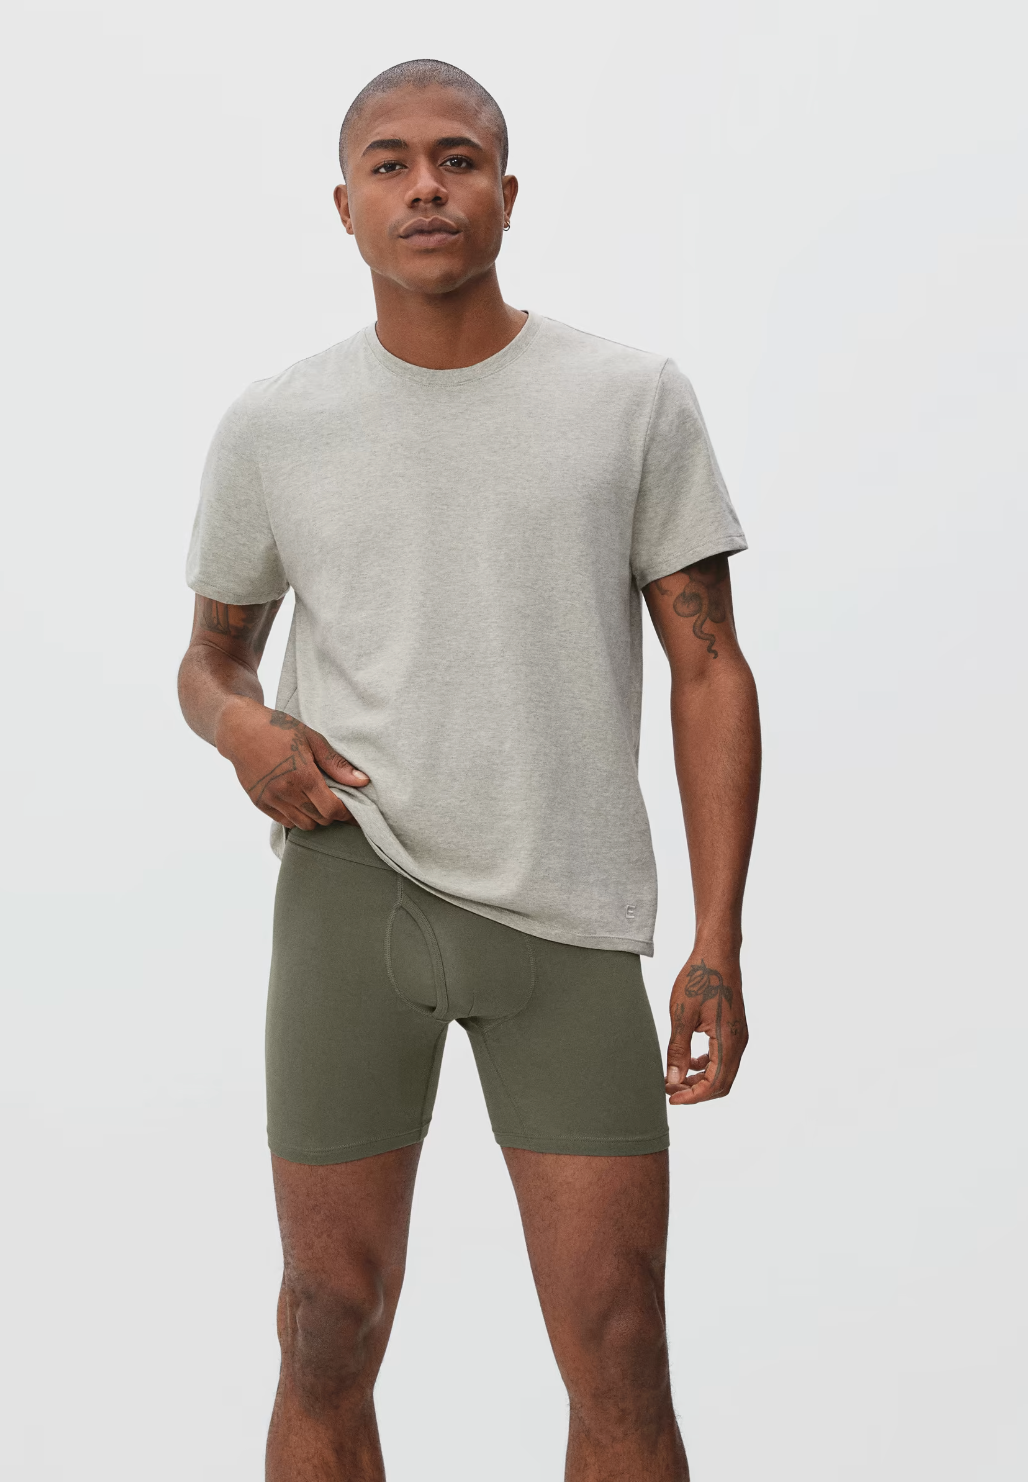 A model in a gray tee and olive green boxer briefs.